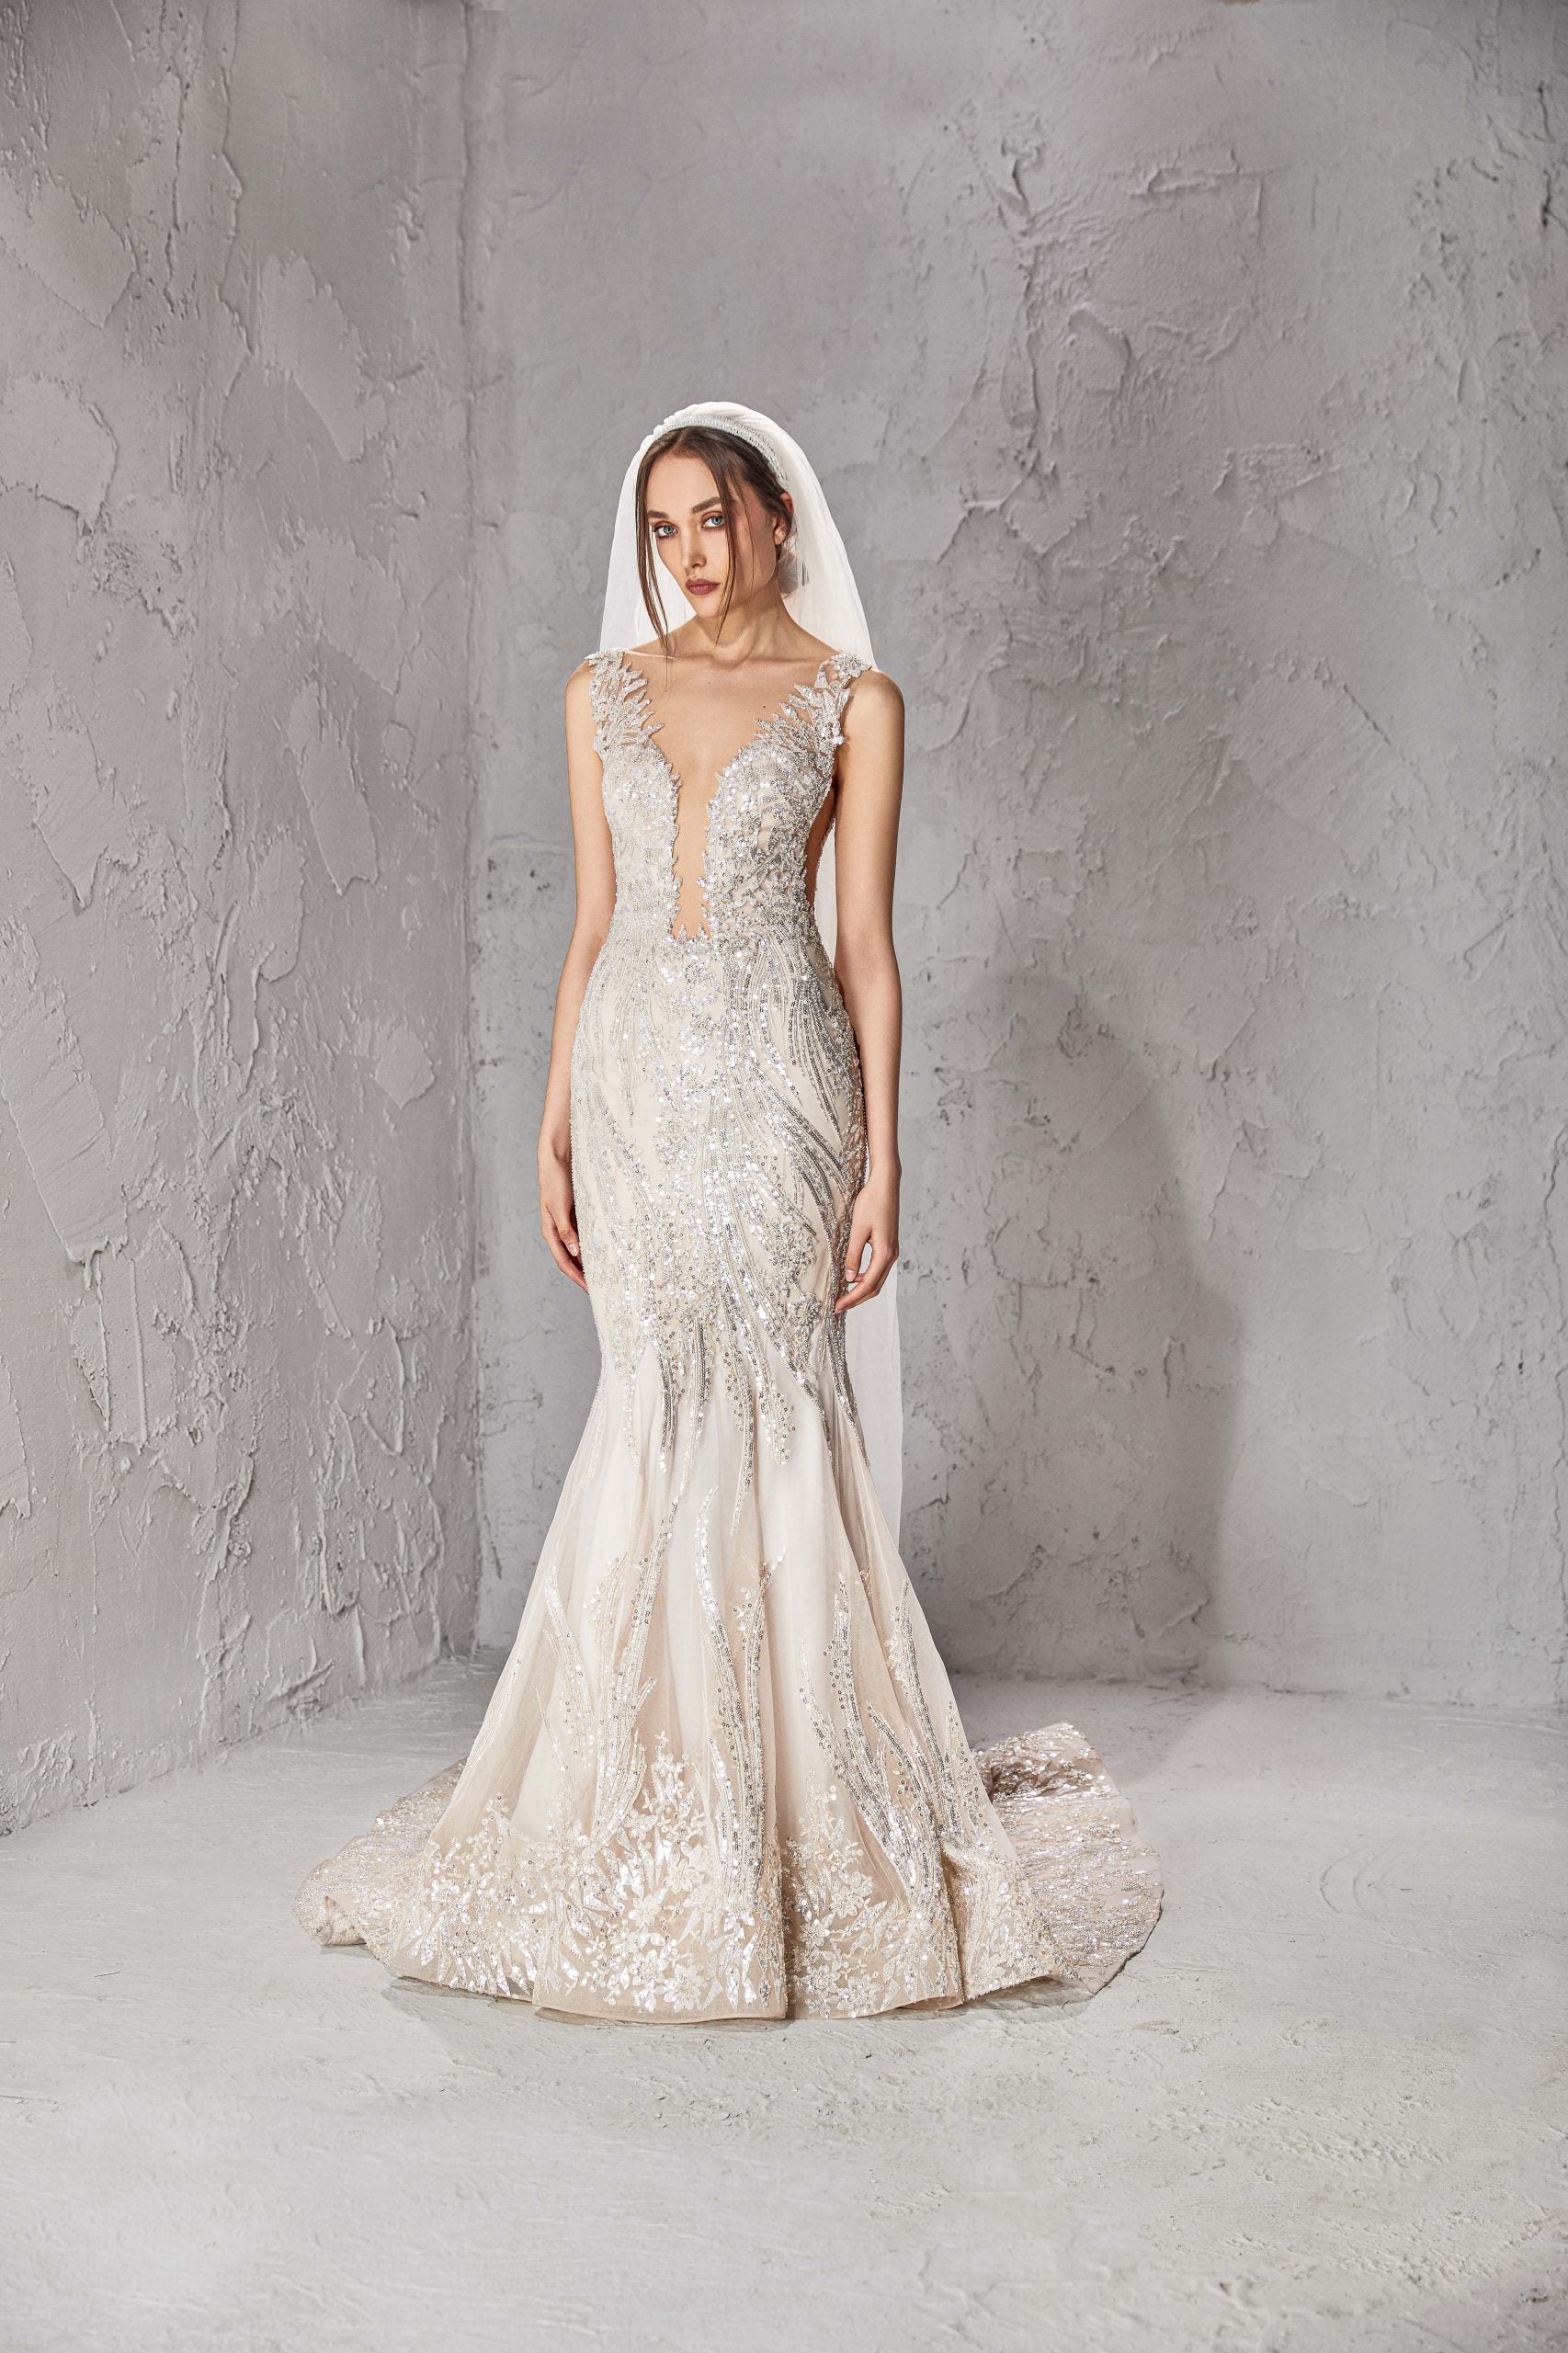 Sleeveless Mermaid Wedding Dress With Plunging V Neckline And Open